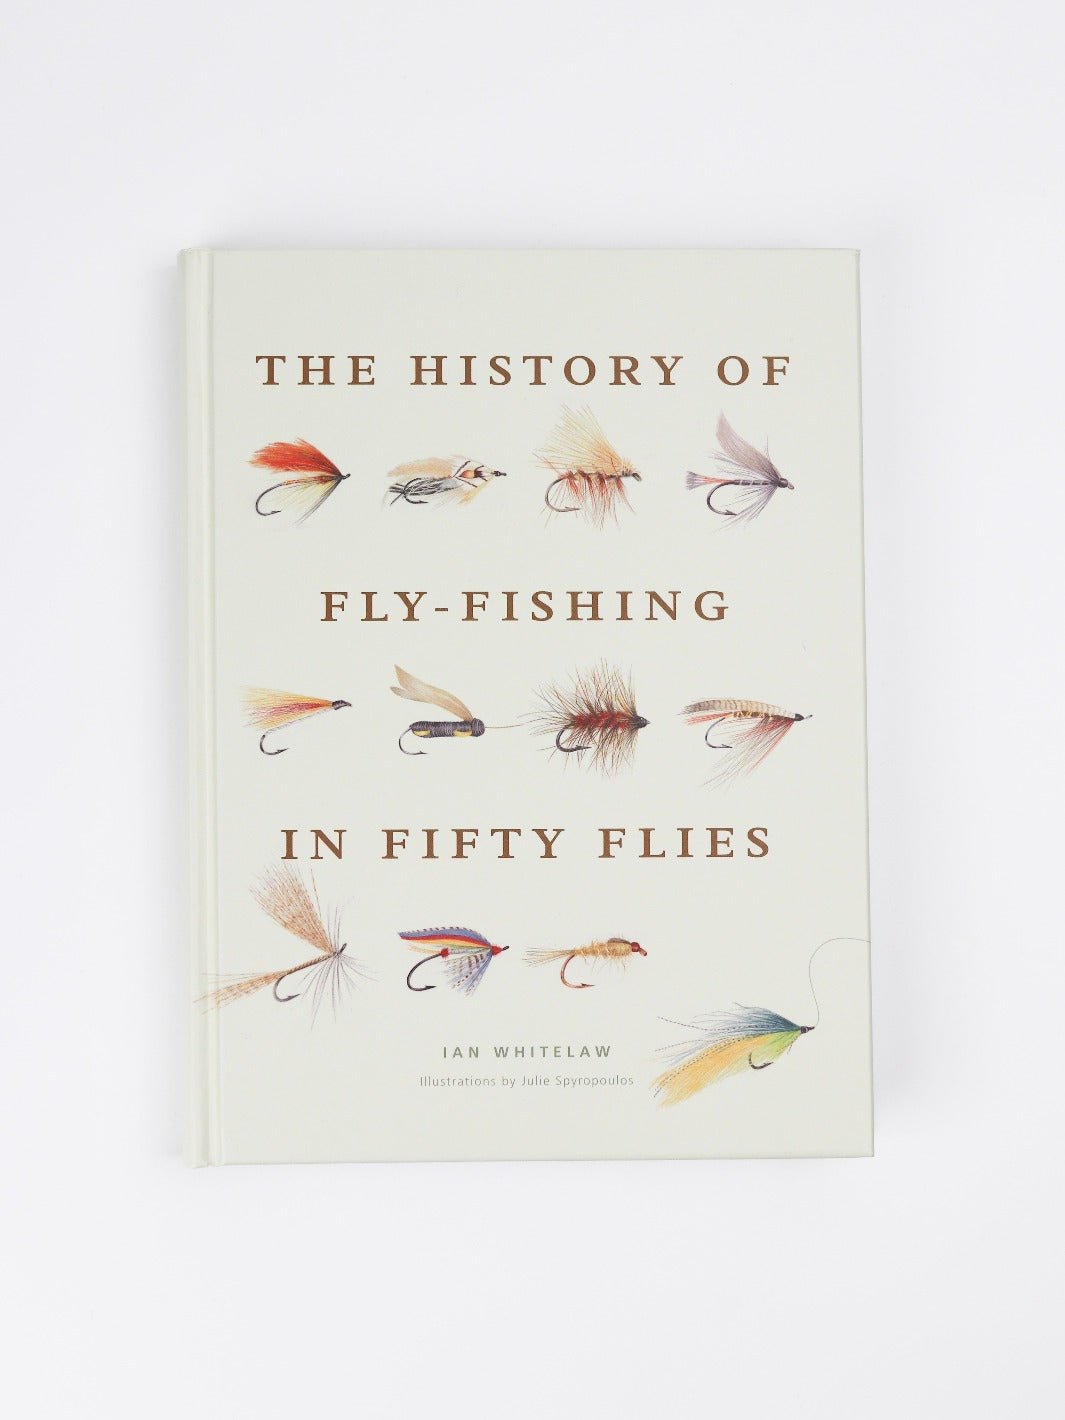 The History of Fly-Fishing in Fifty Flies - Heyday